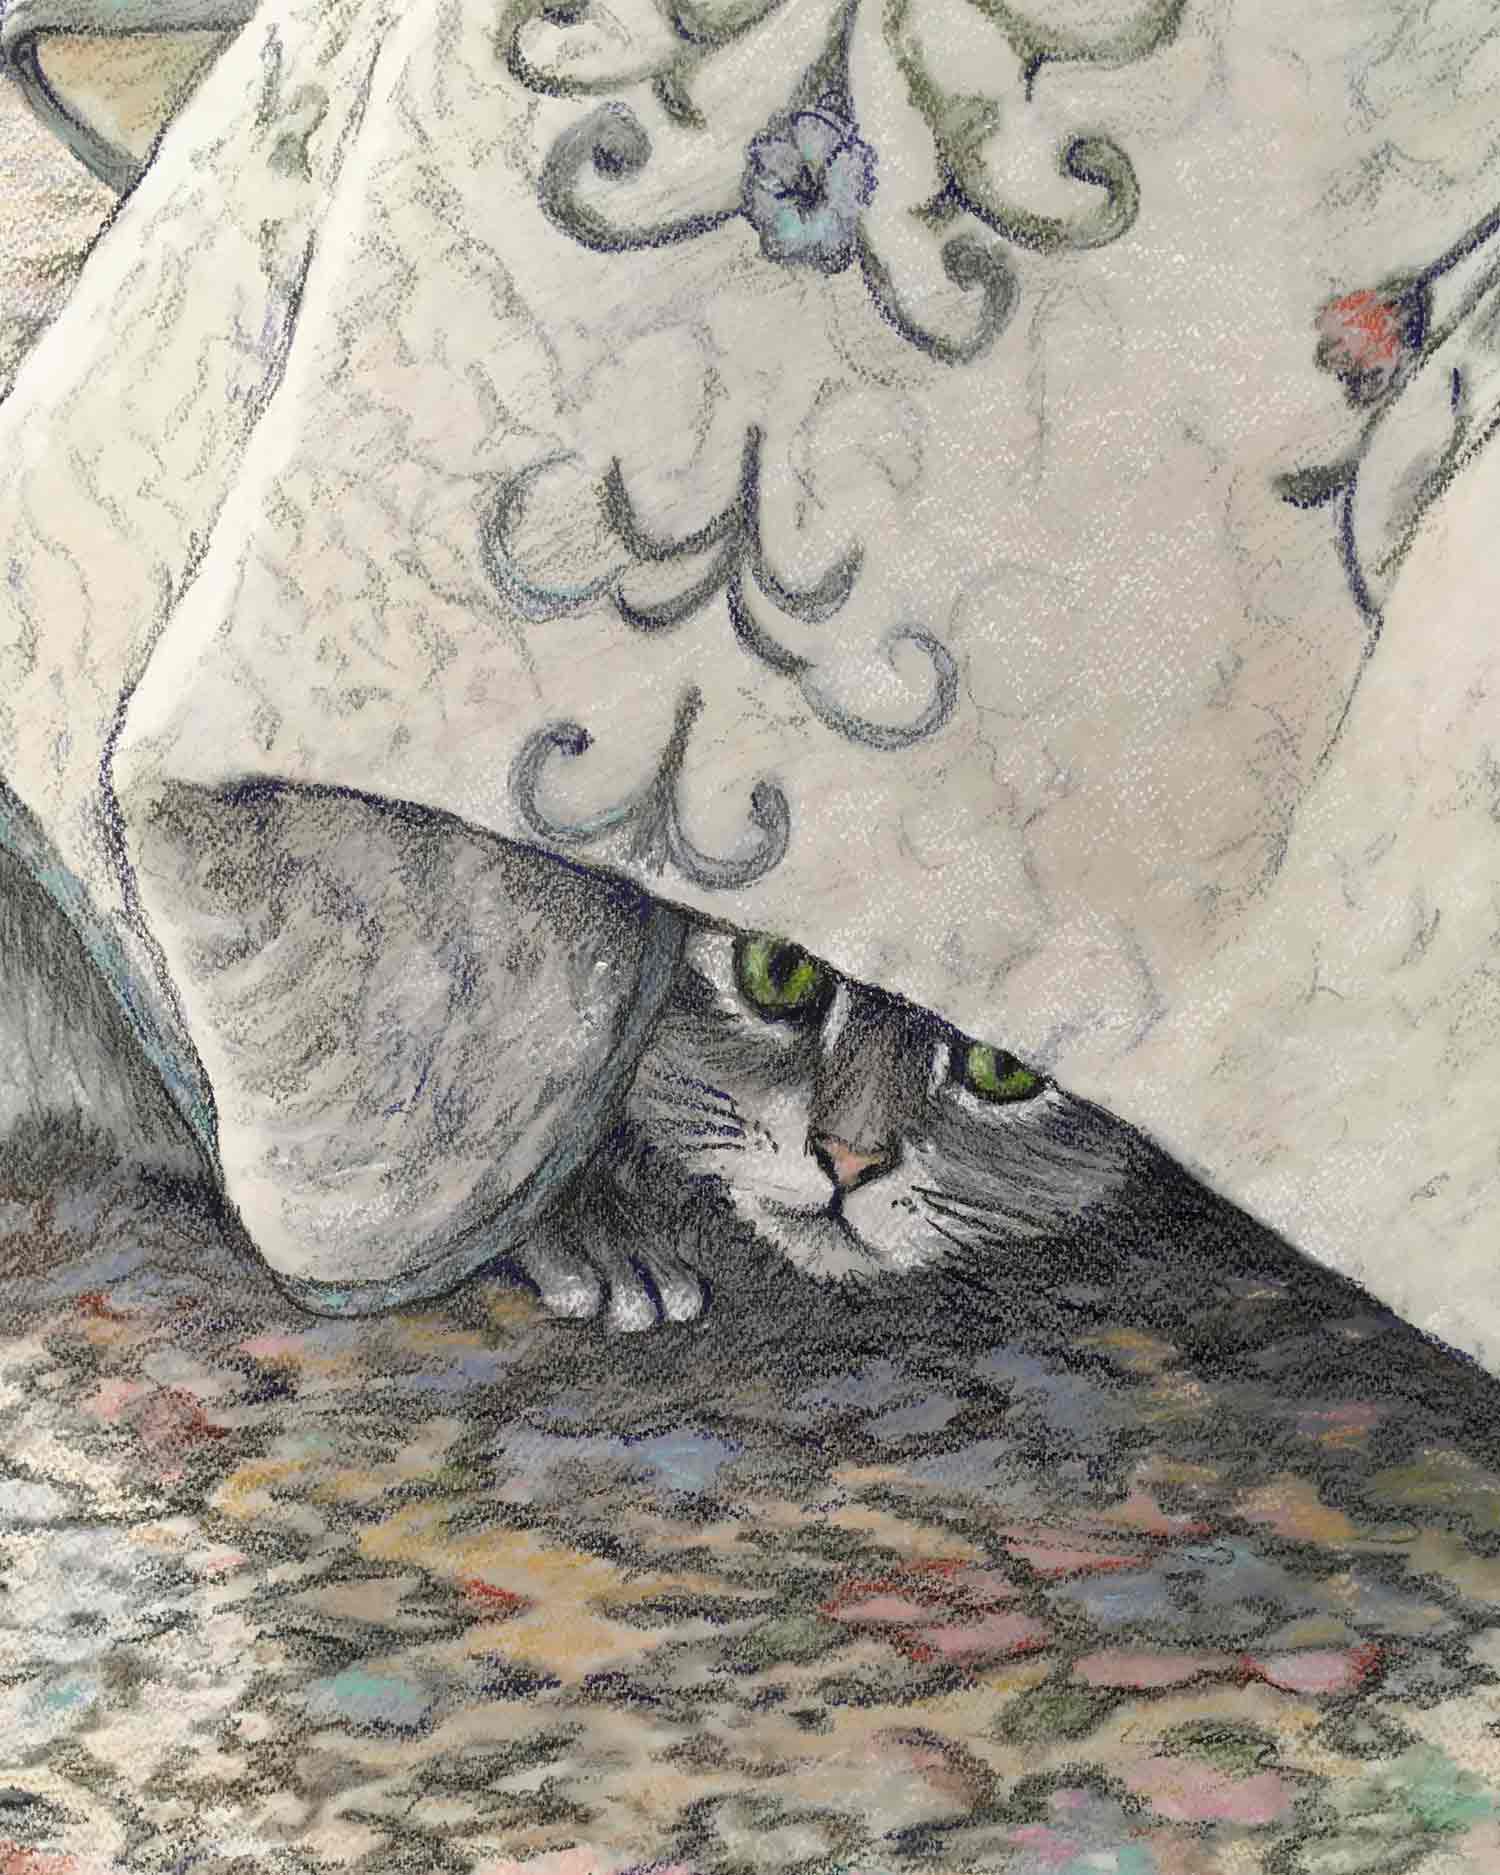  “Is it safe to come out now?” 20 x 16 inches, Pencil and pastels ©2020 Maria Sky, All Rights Reserved <p>Drawing of Milly the cat, hiding under the bed wondering when it will be safe to come out..</p>